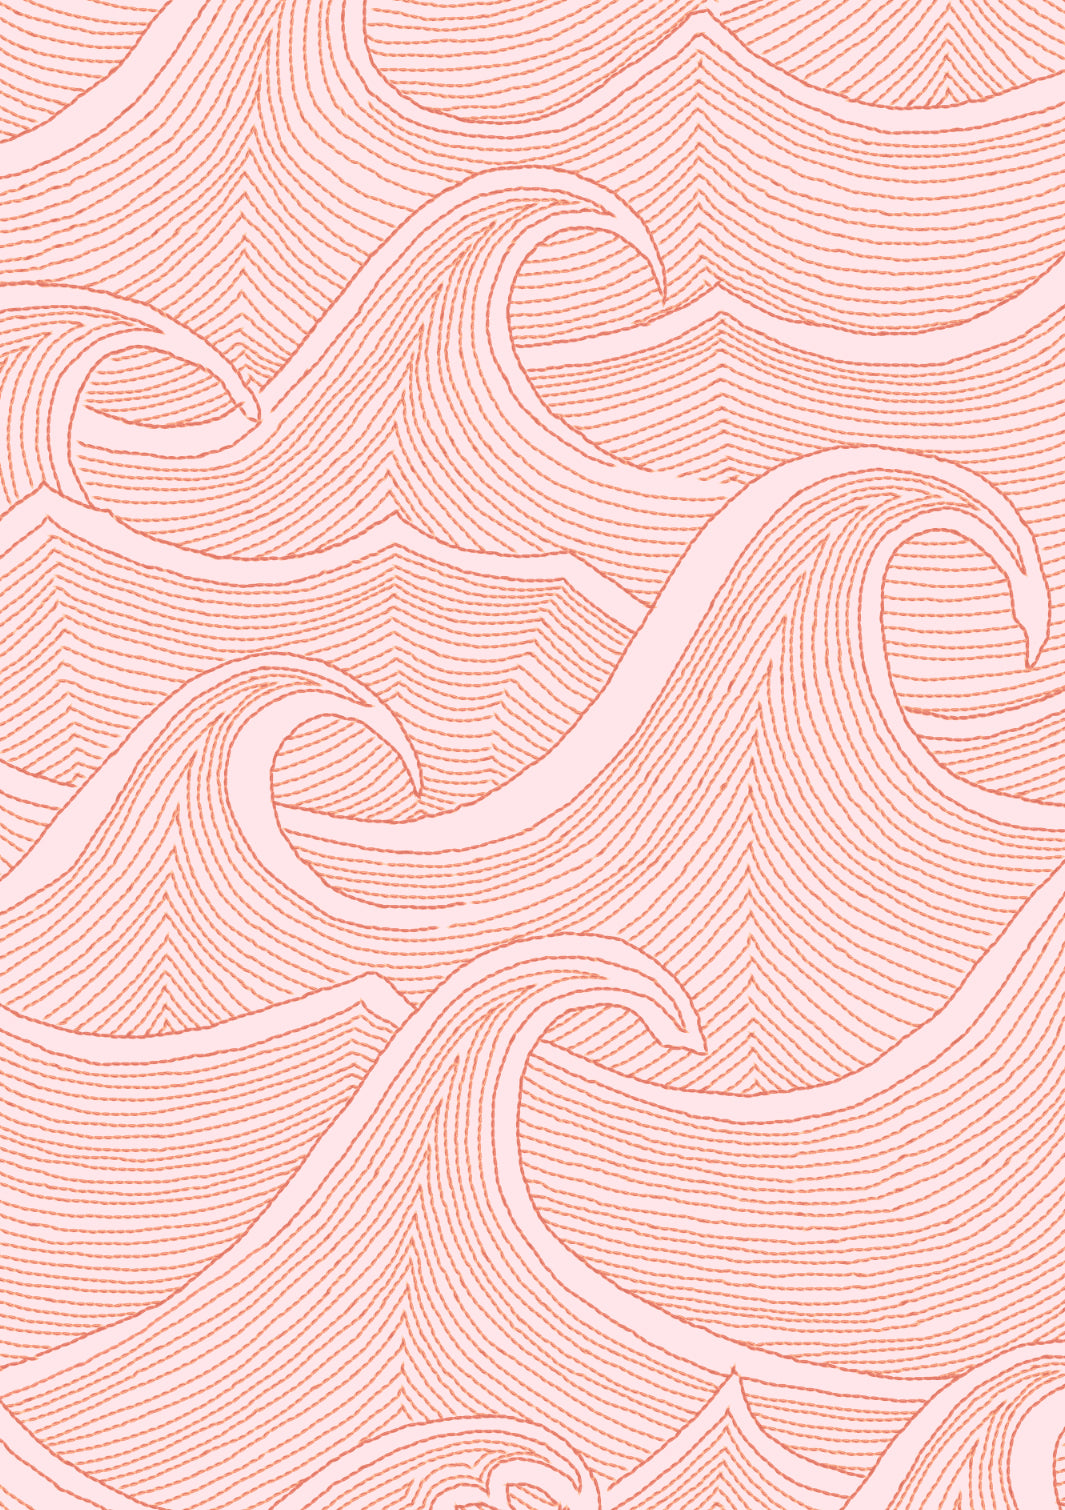 'Waves Two Tone' Wallpaper by Lingua Franca - Persimmon